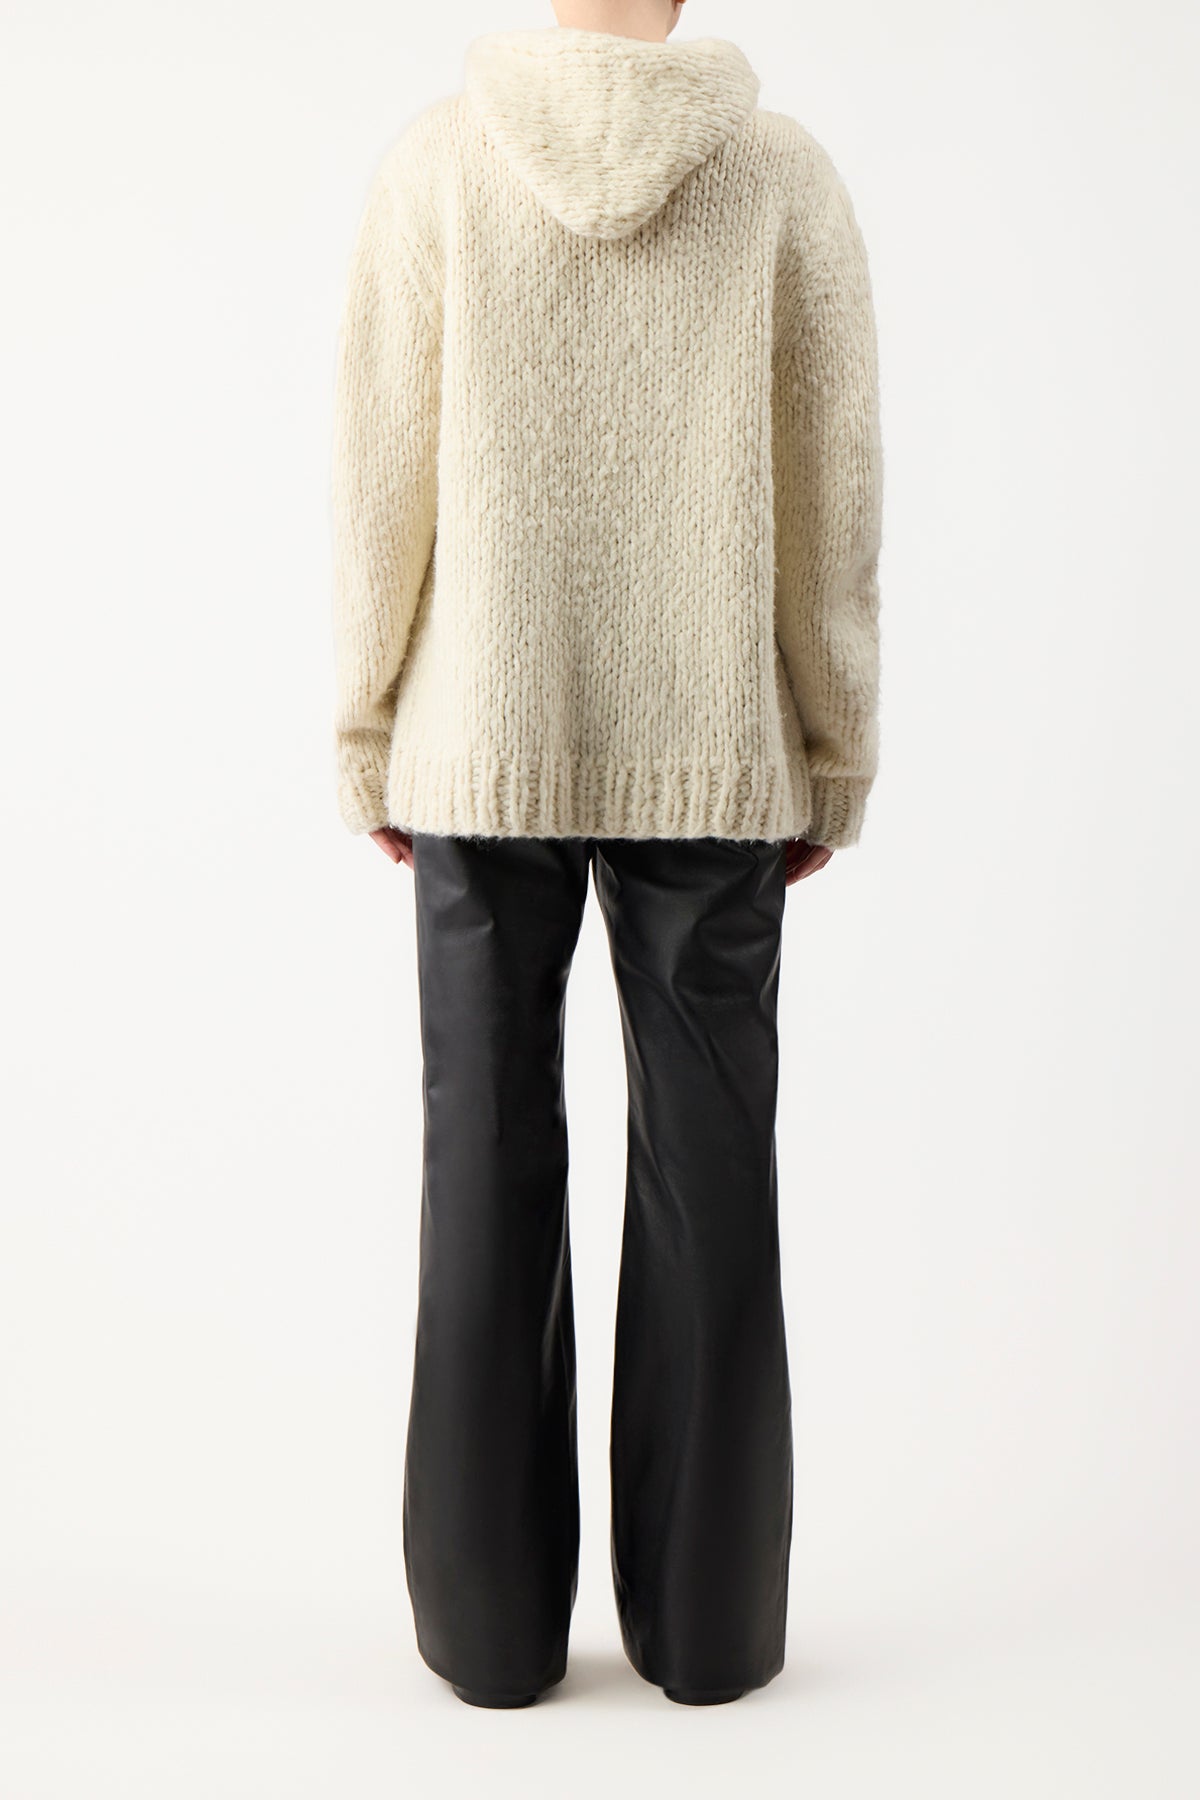 Carlton Knit Hoodie in Ivory Welfat Cashmere